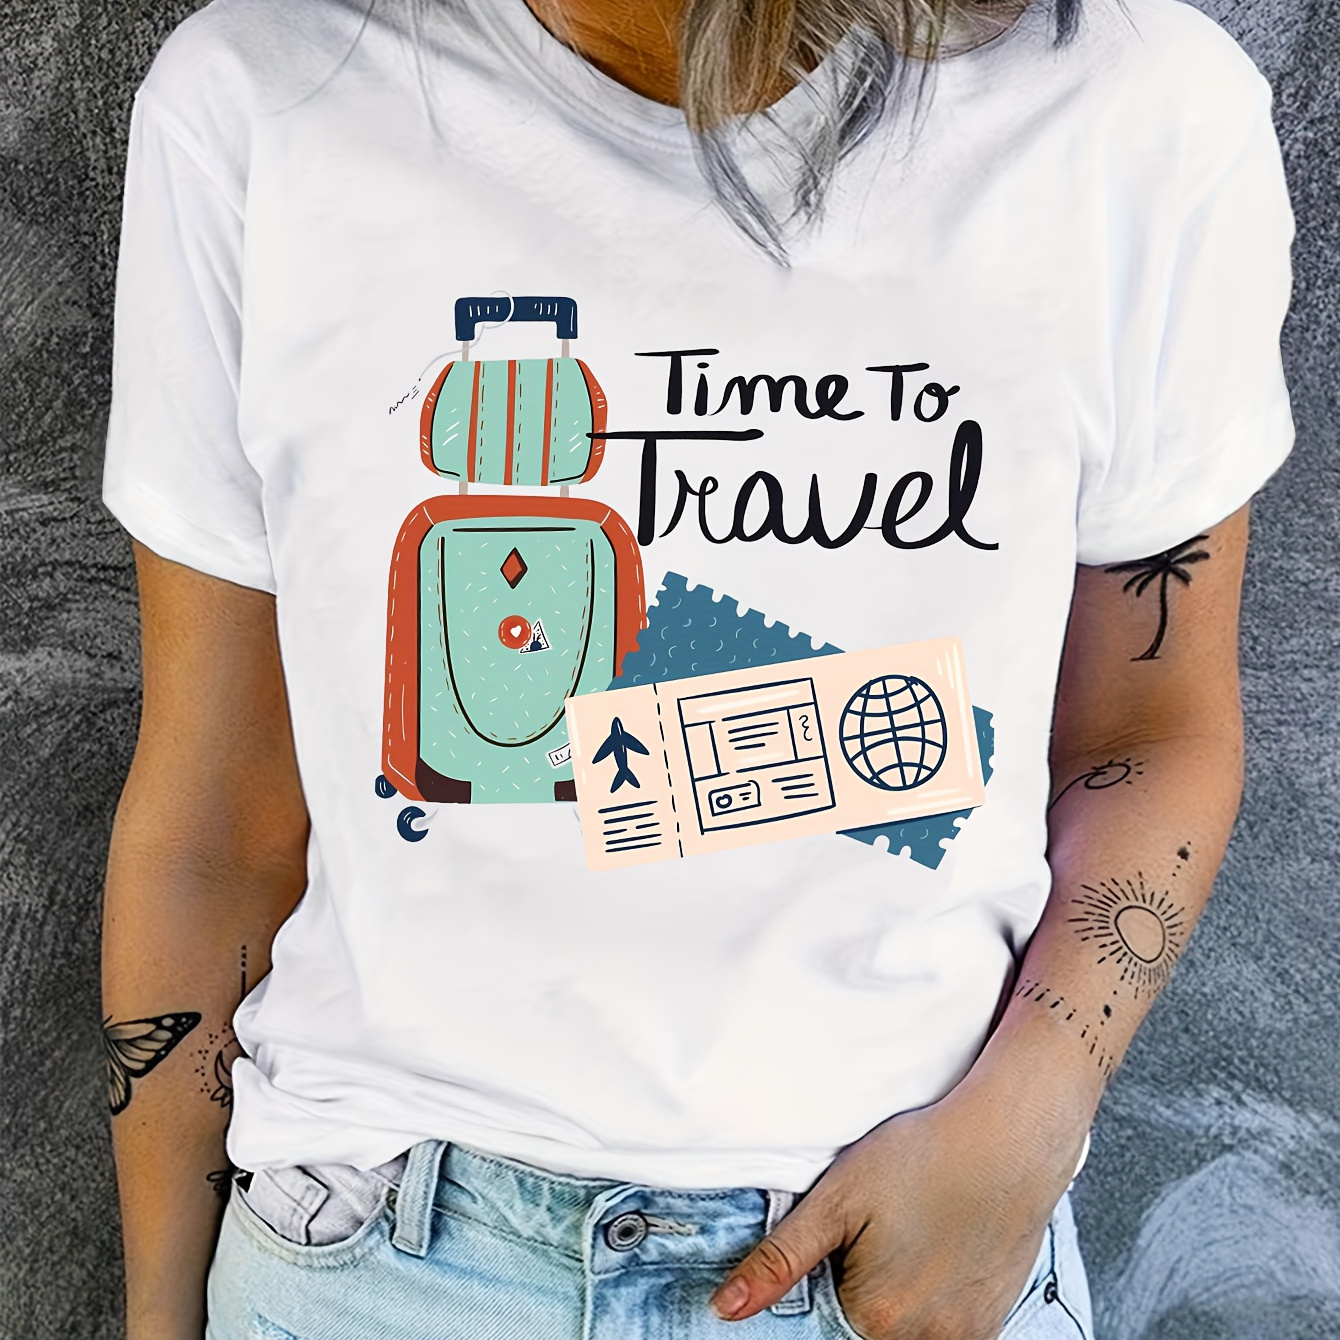 

Travel Print T-shirt, Casual Crew Neck Short Sleeve Top For Spring & Summer, Women's Clothing